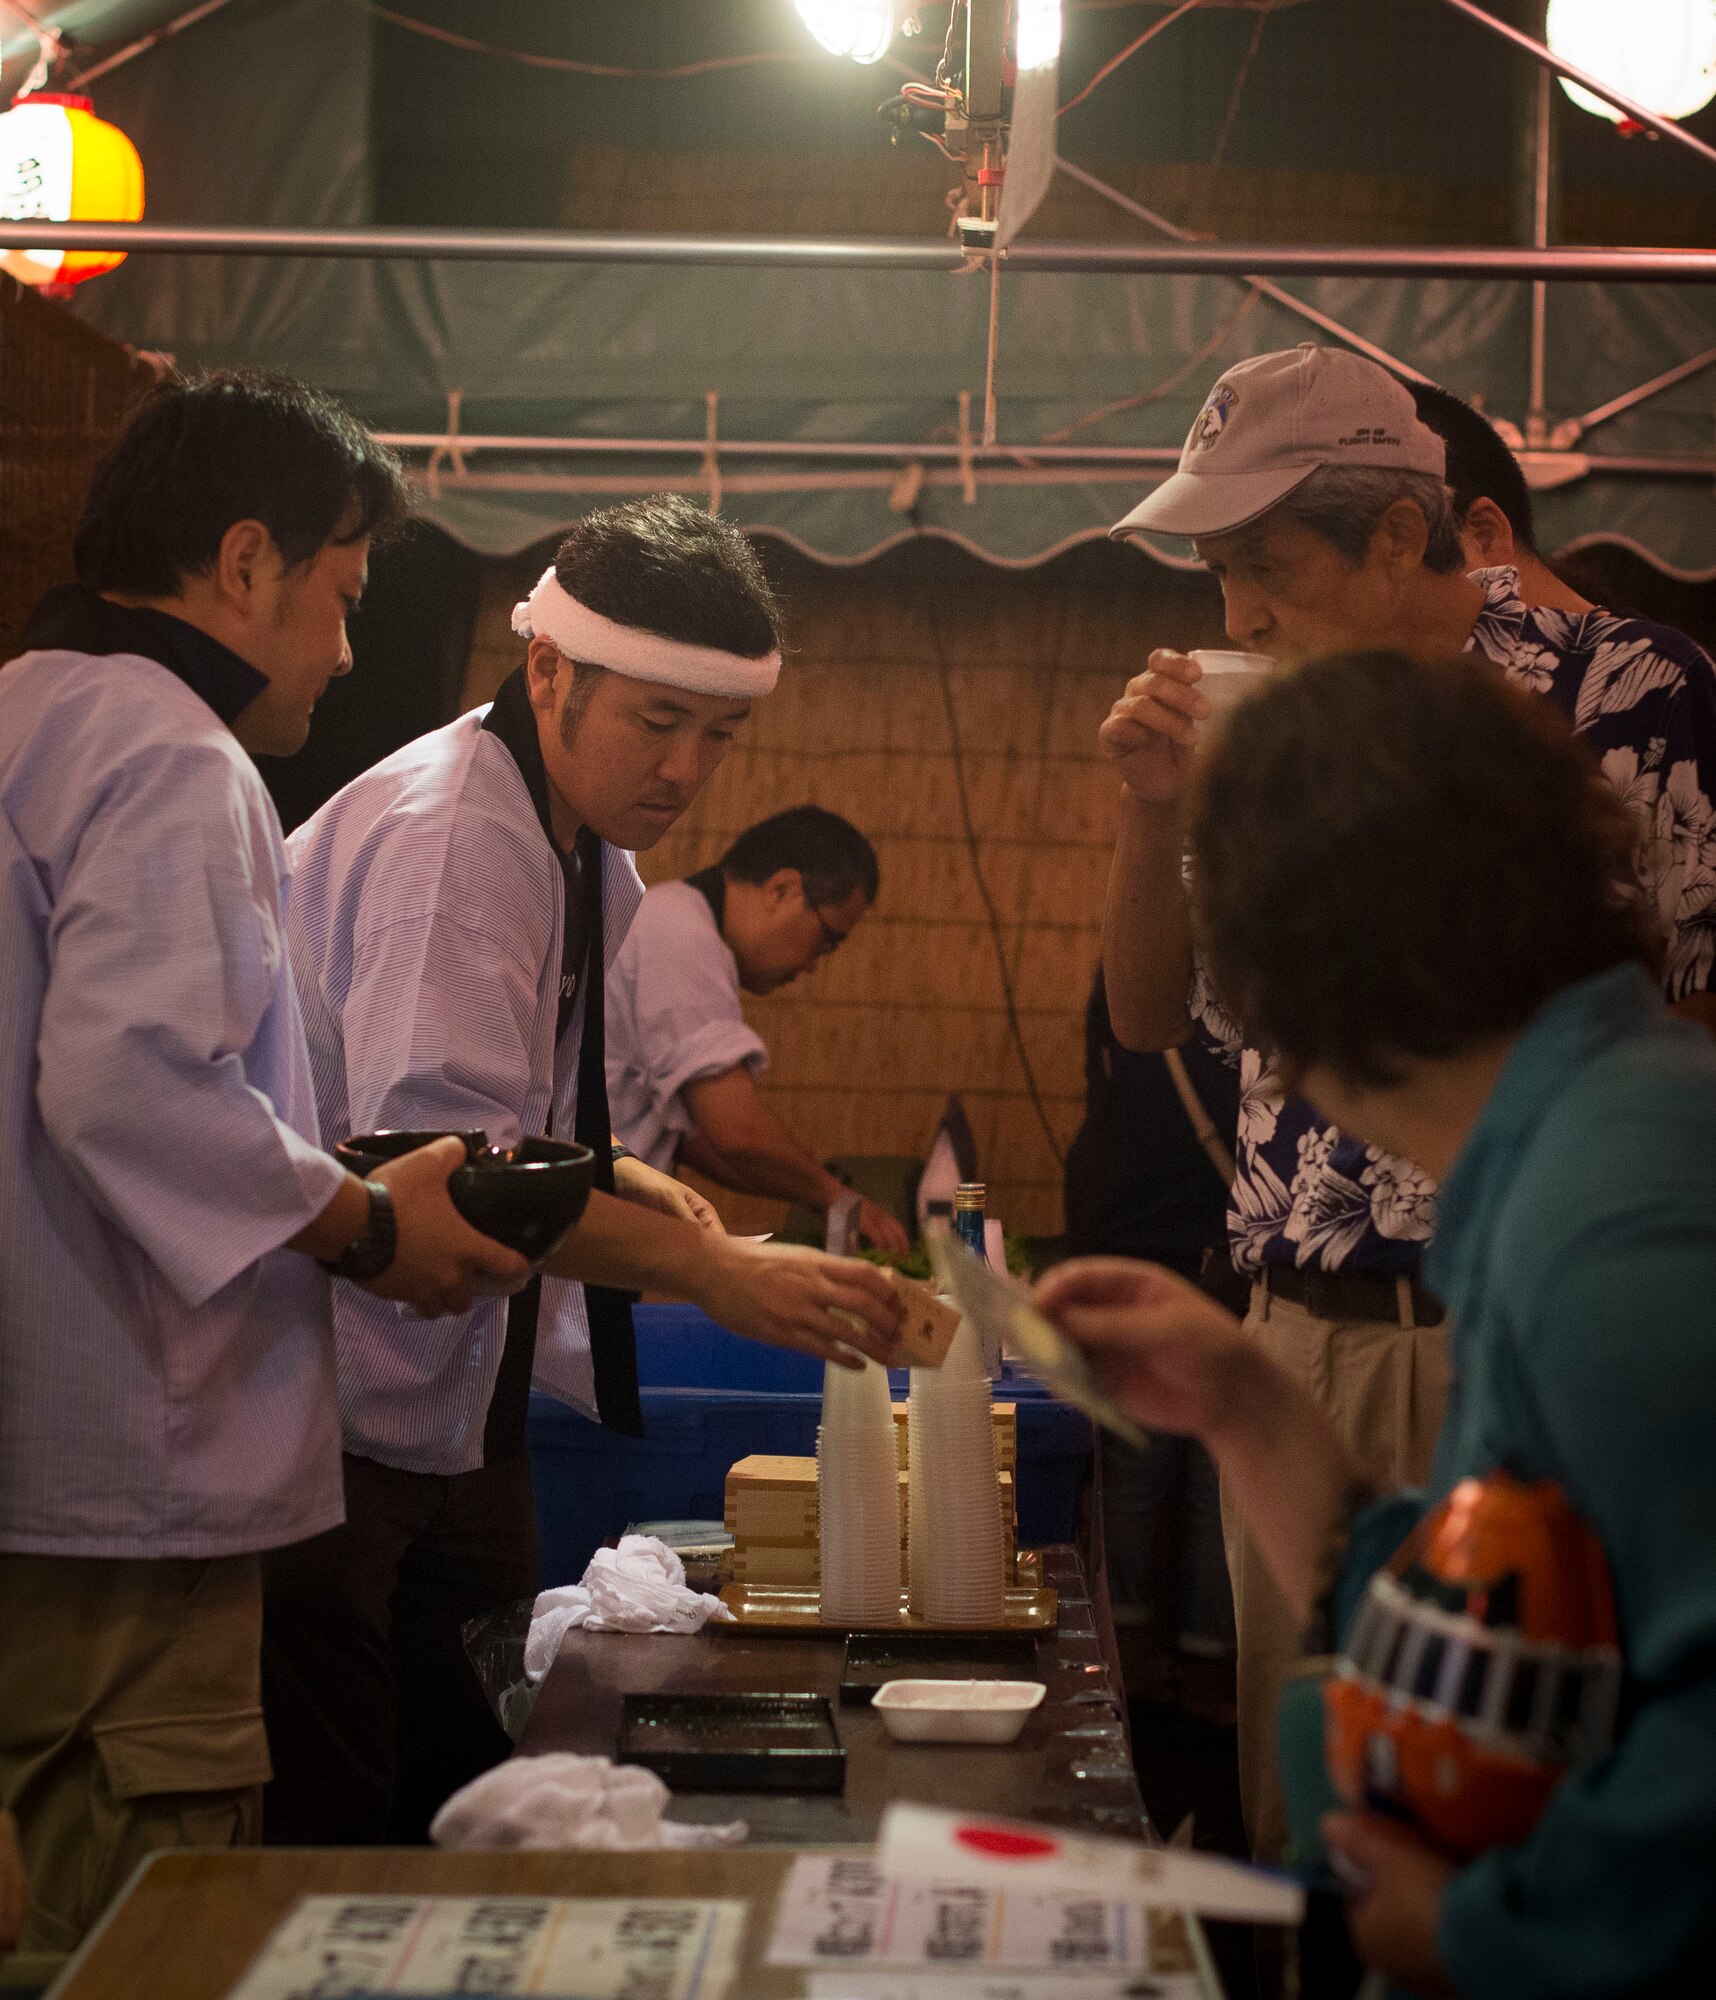 Sake vendors prepare drinks at the Fussa Tanabata Festival in Fussa City, Japan, Aug. 8, 2013. Tanabata is the Japanese star festival originating from the Chinese Qixi Festival, celebrating the meeting of the stars Vega and Altair. (U.S. Air Force photo by Airman 1st Class Meagan Schutter/Released)